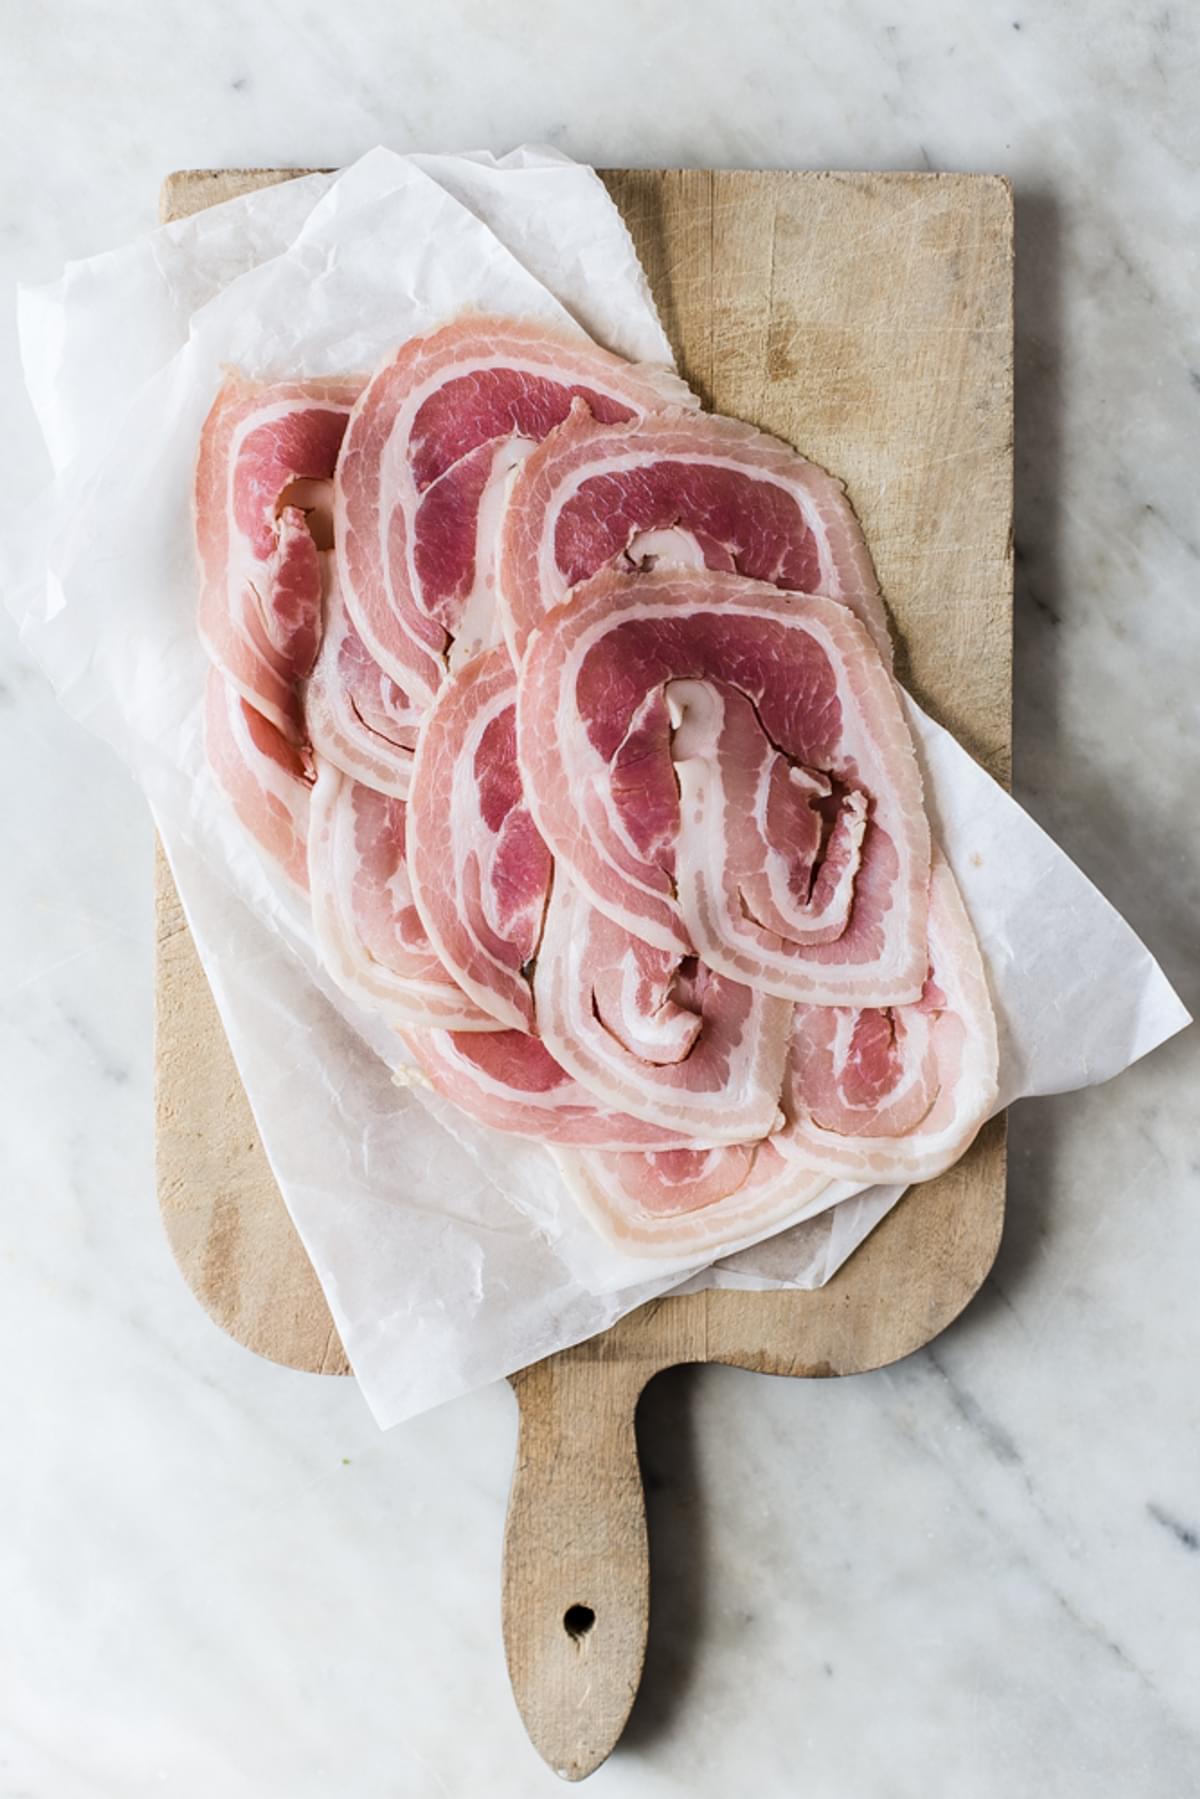 pancetta on parchment paper on a cutting board.